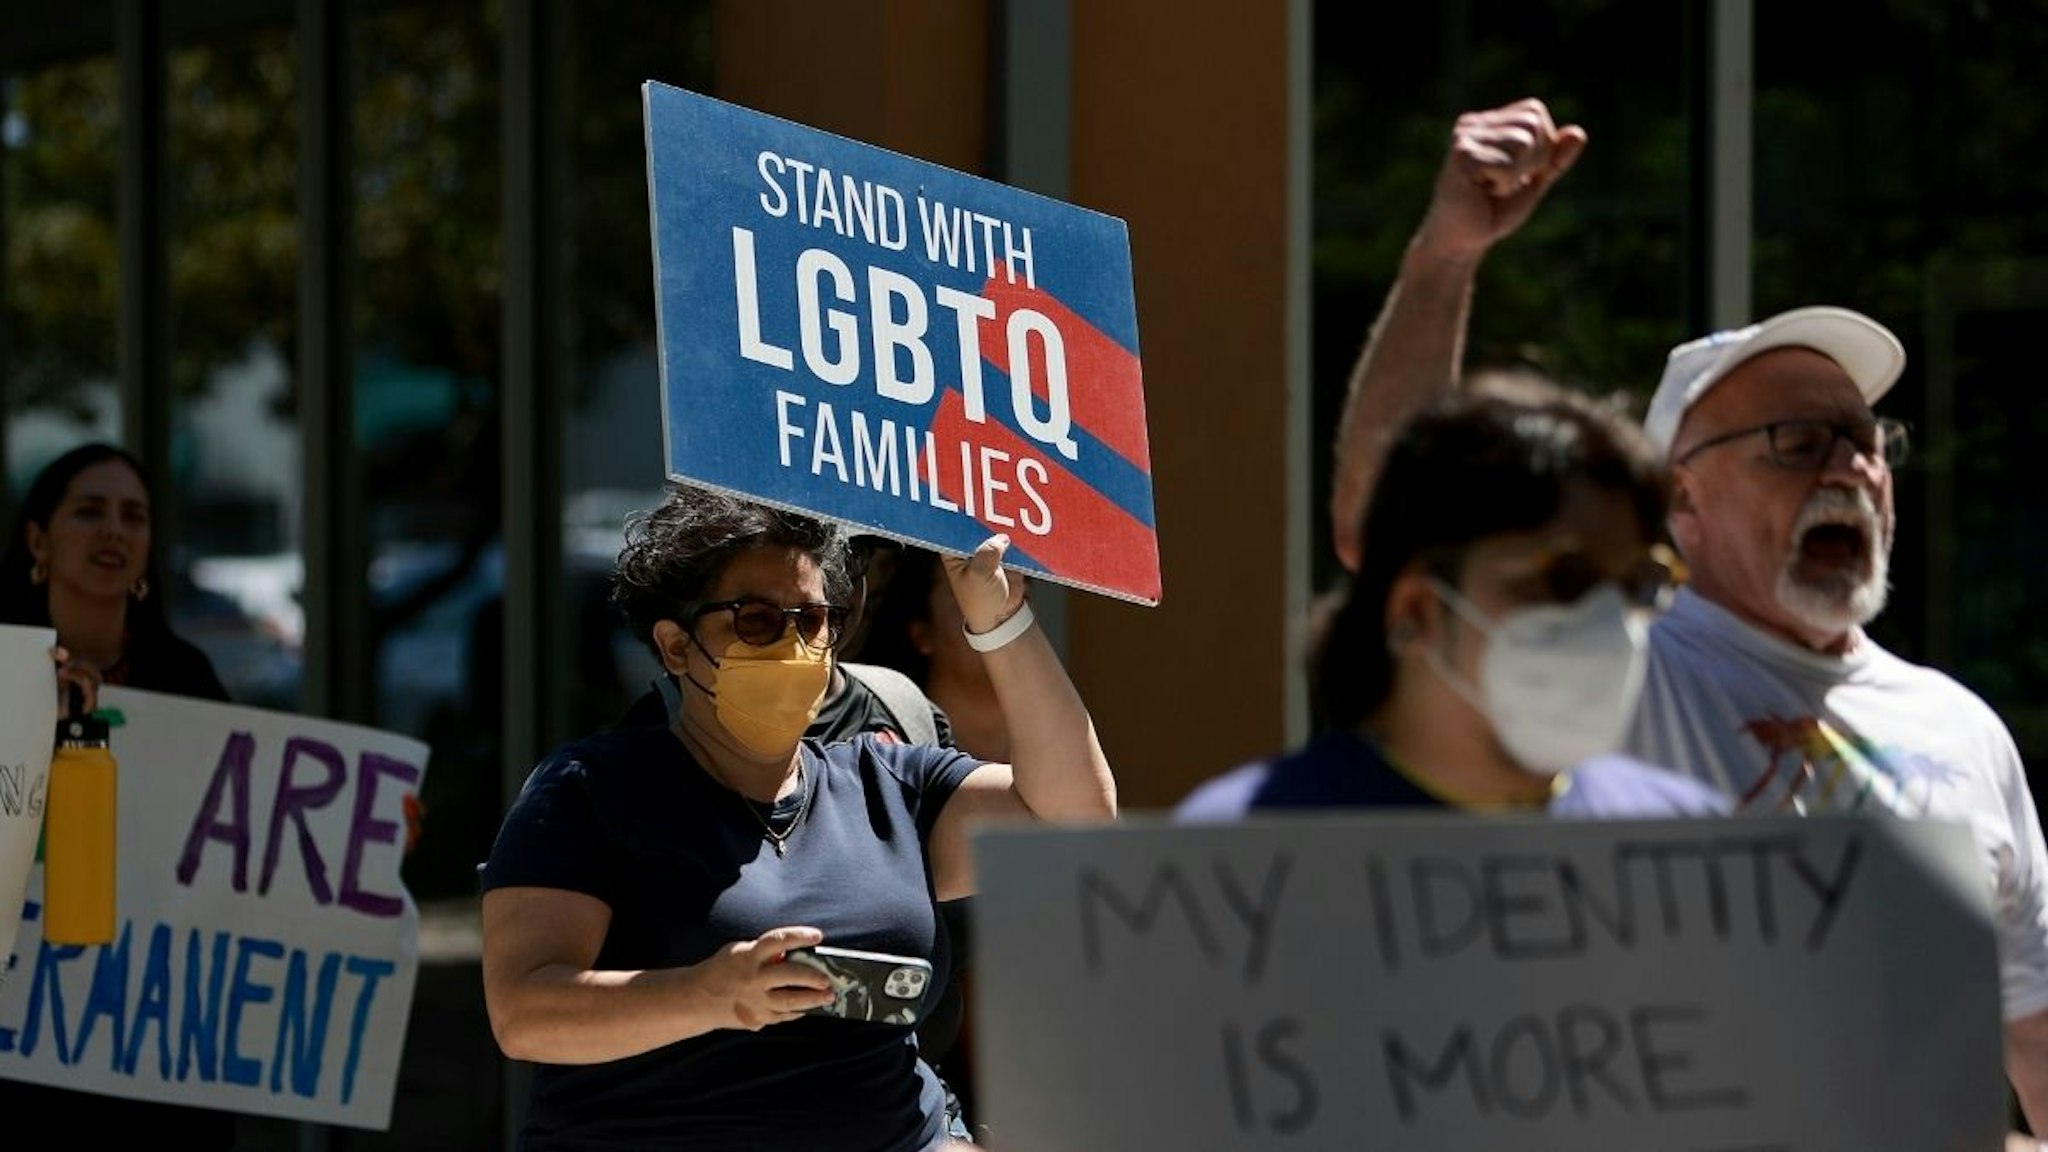 People protest in front of Florida State Senator Ileana Garcia's (FL-R) office after the passage of the Parental Rights in Education bill, dubbed the "Don't Say Gay" bill by LGBTQ activists on March 09, 2022 in Miami, Florida.